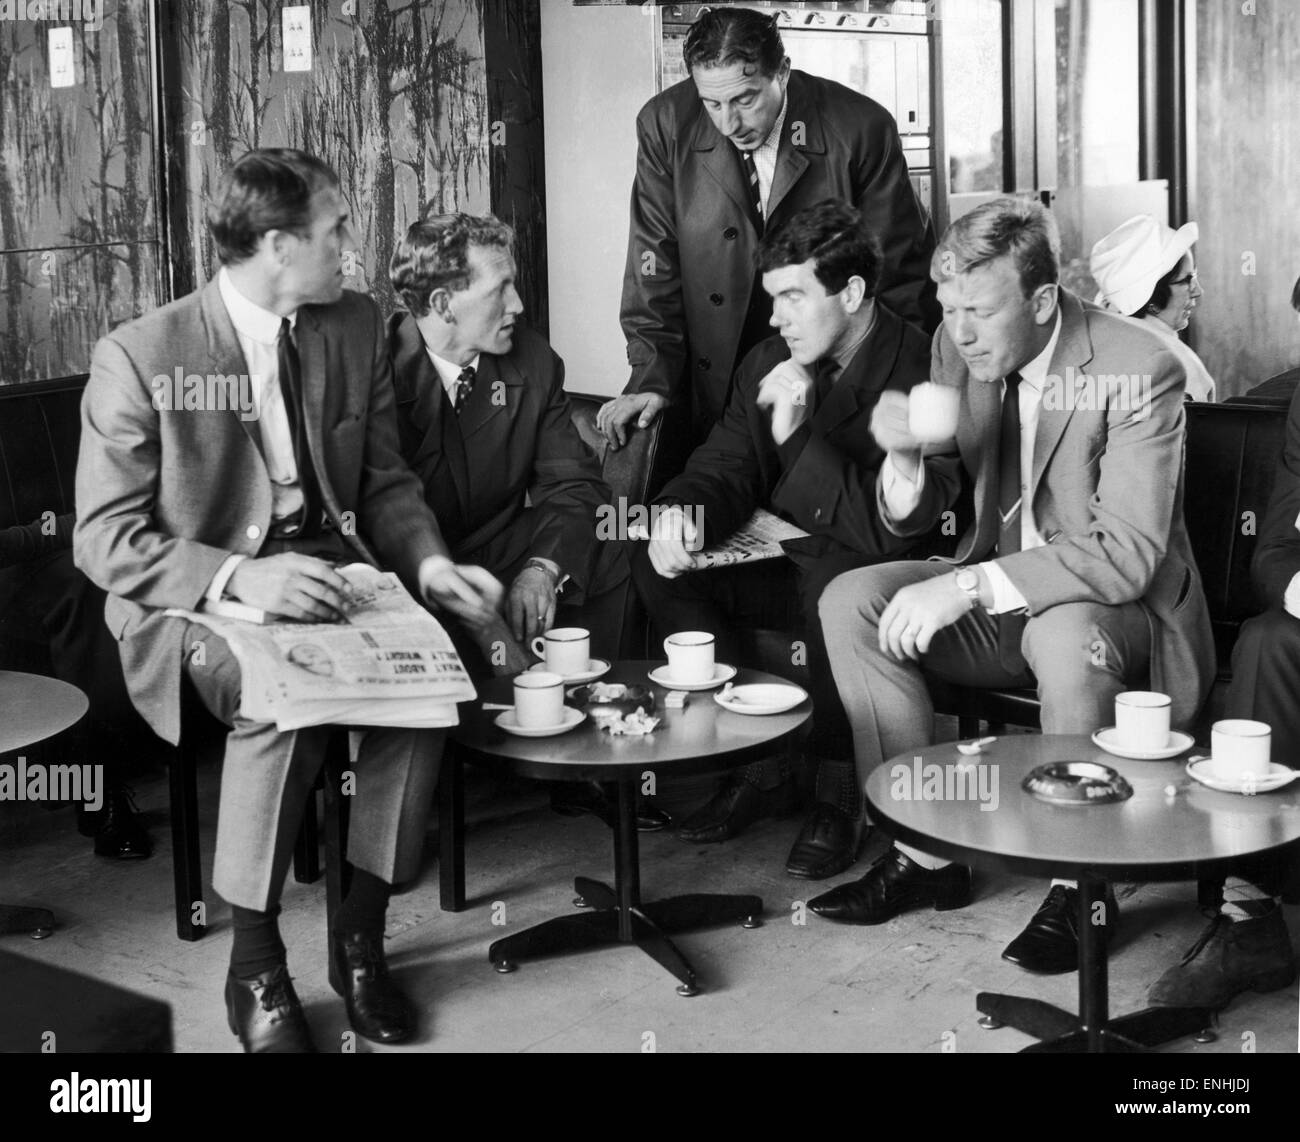 Everton players enjoy a cup of tea at Speke Airport before flying out to Norway from Liverpool. Pictured left to right seated: Ray Wilson, Sandy Brown, Alex Scott, Jimmy Gabriel with manager Harry Catterick standing behind. 8th August 1965. Stock Photo